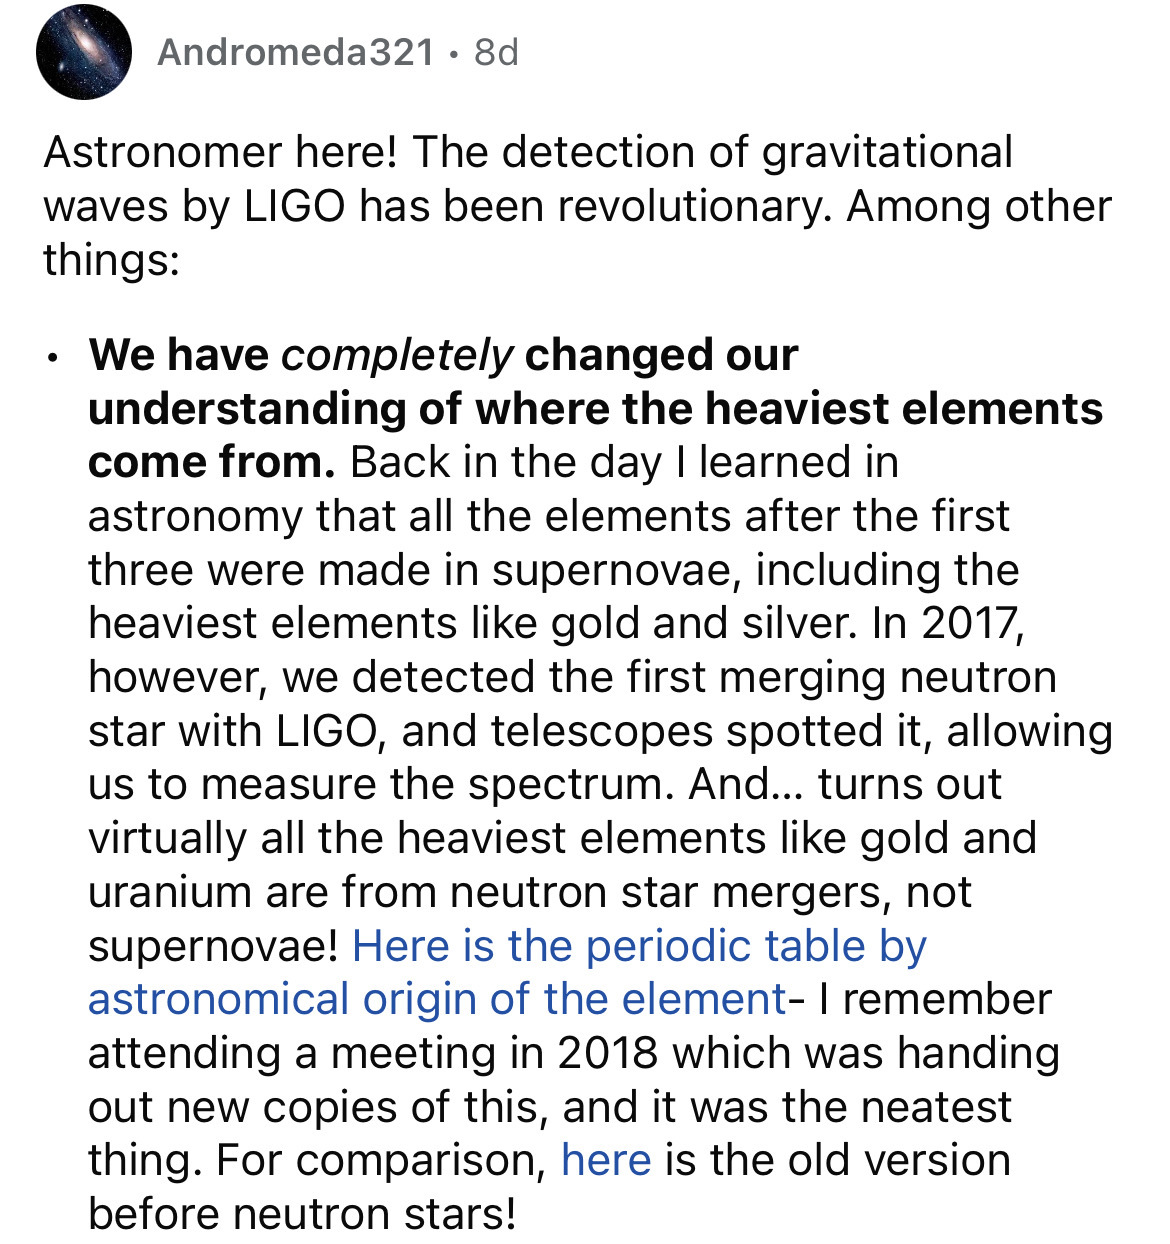 document - Andromeda321 8d Astronomer here! The detection of gravitational waves by Ligo has been revolutionary. Among other things We have completely changed our understanding of where the heaviest elements come from. Back in the day I learned in astrono